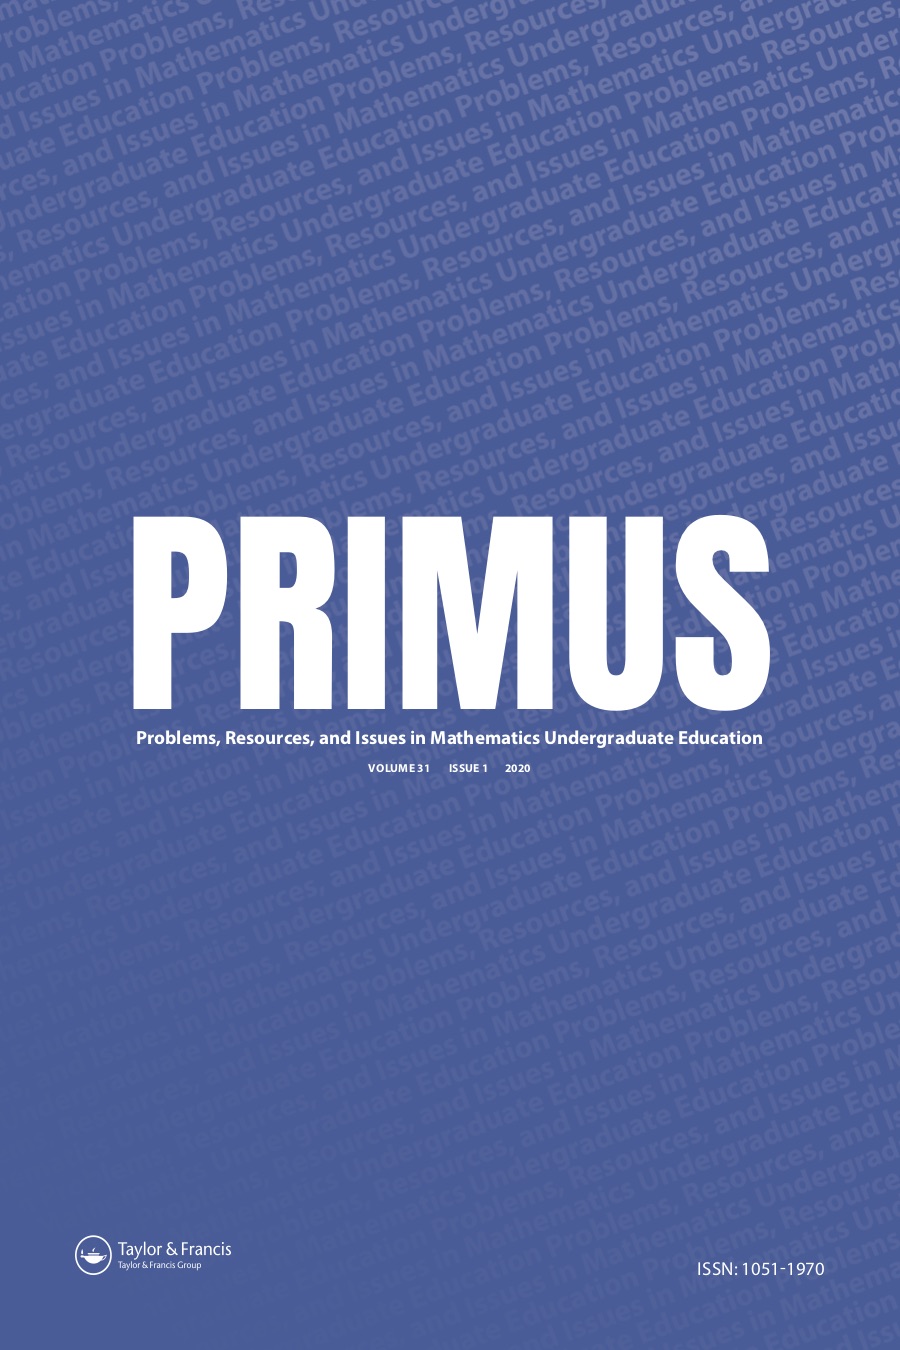 The journal PRIMUS